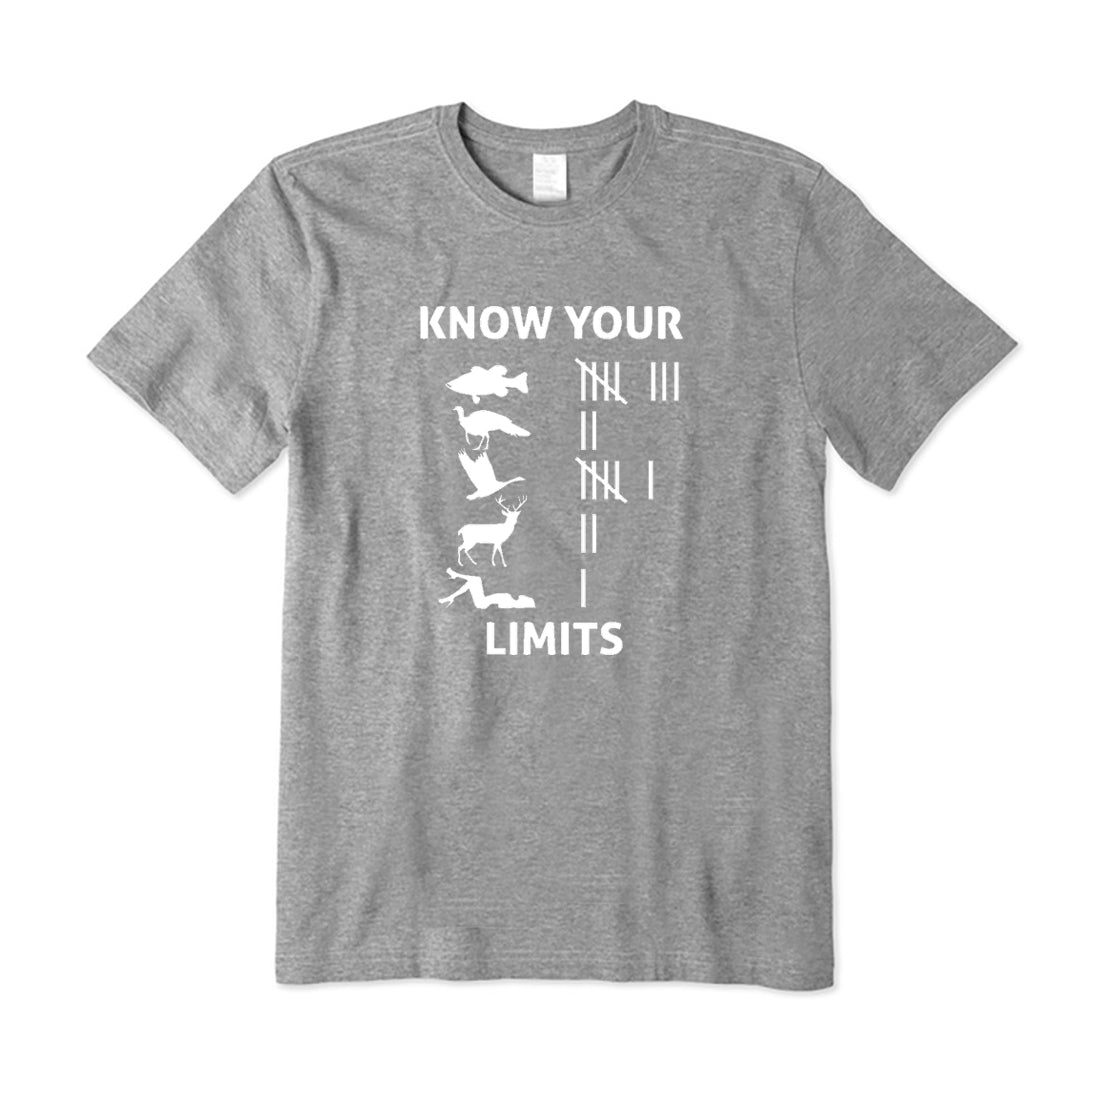 Know your Limits T-Shirt